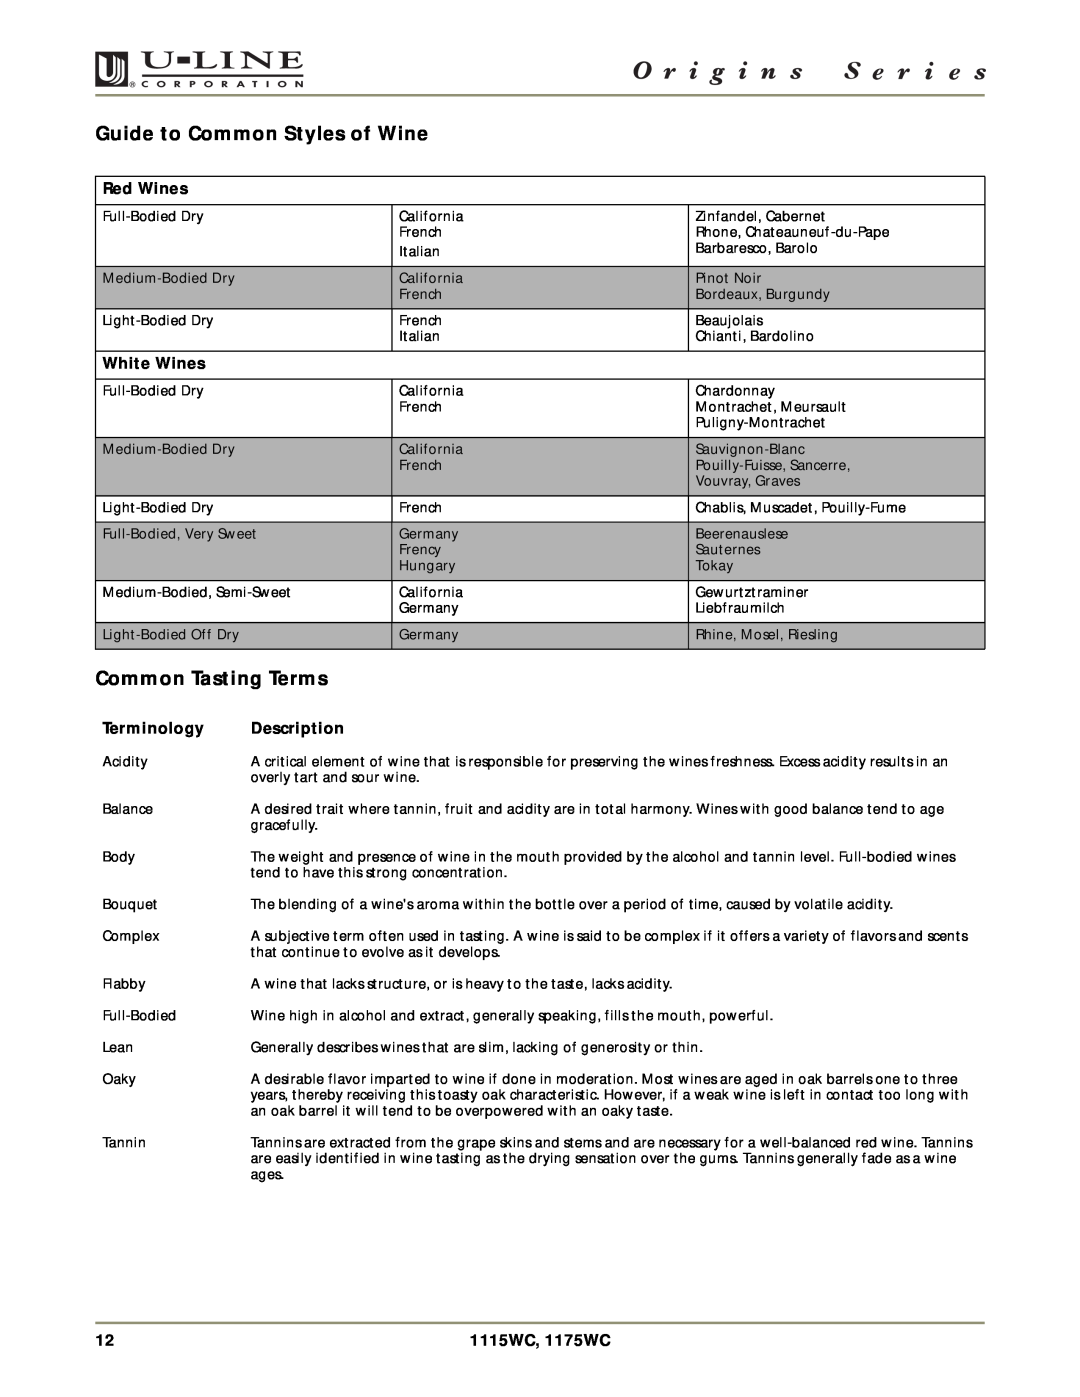 U-Line 1115WC manual Guide to Common Styles of Wine, Common Tasting Terms, Red Wines, White Wines, Terminology, Description 